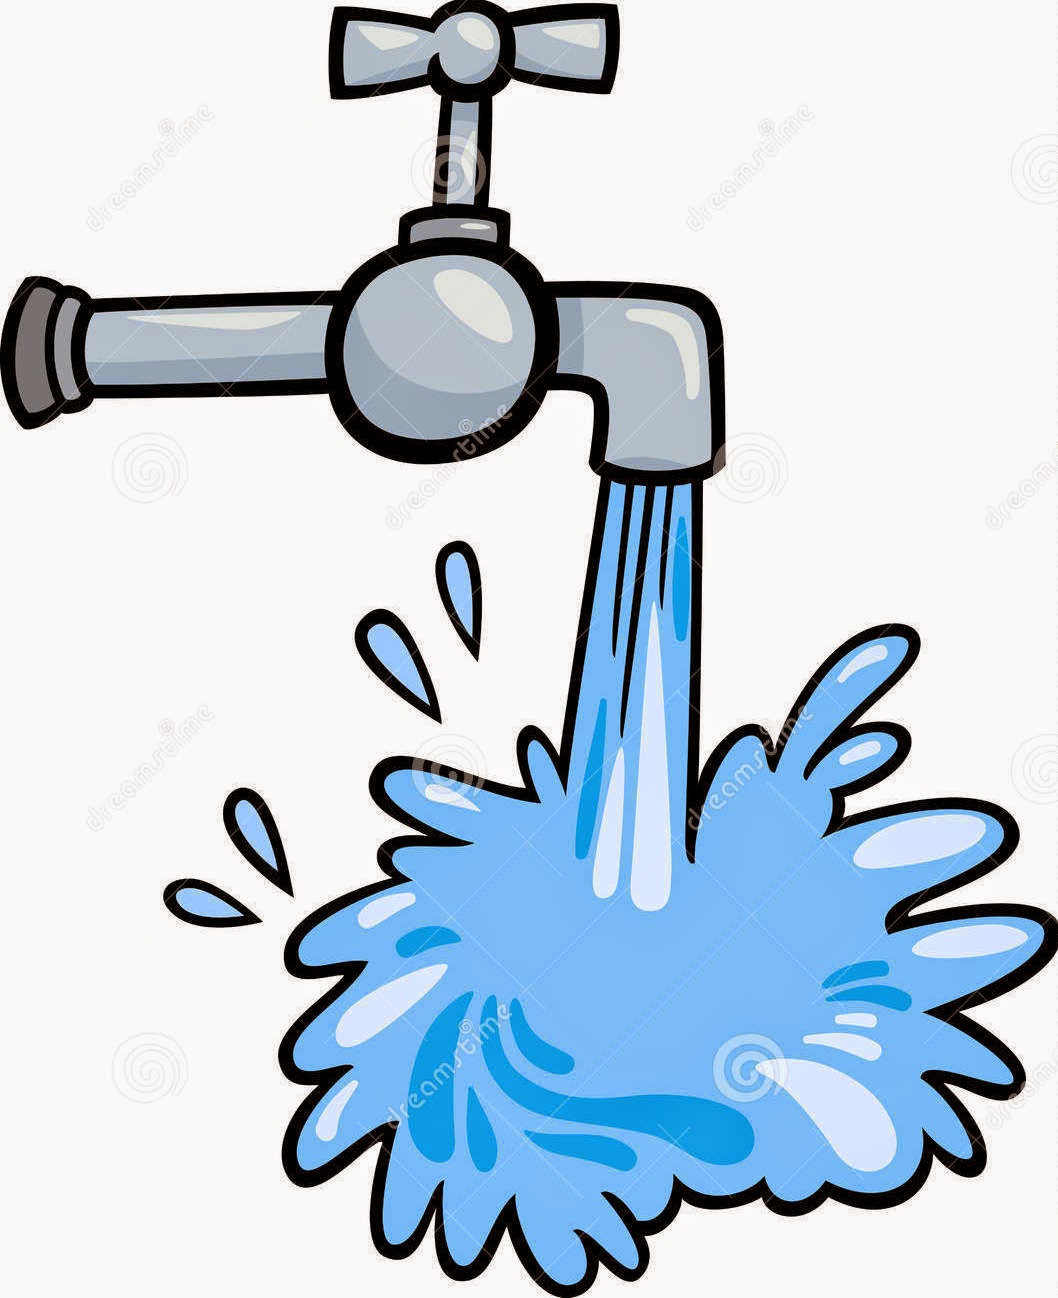 water clipart - Clipart Water